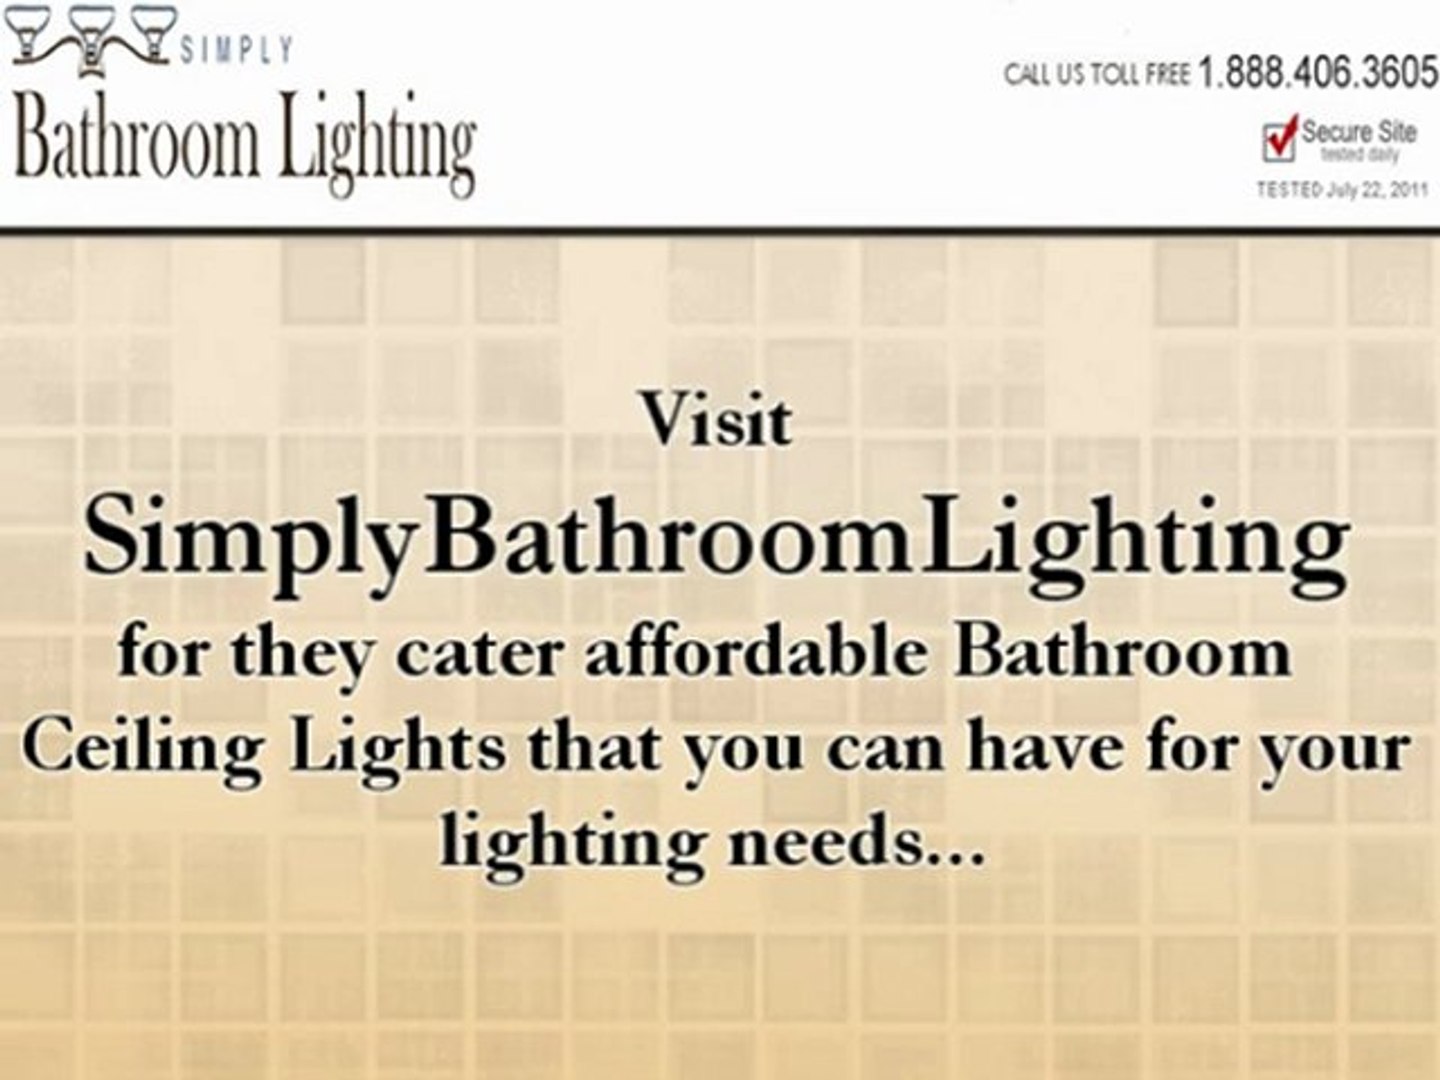 Affordable Bathroom Ceiling Lights Video Dailymotion